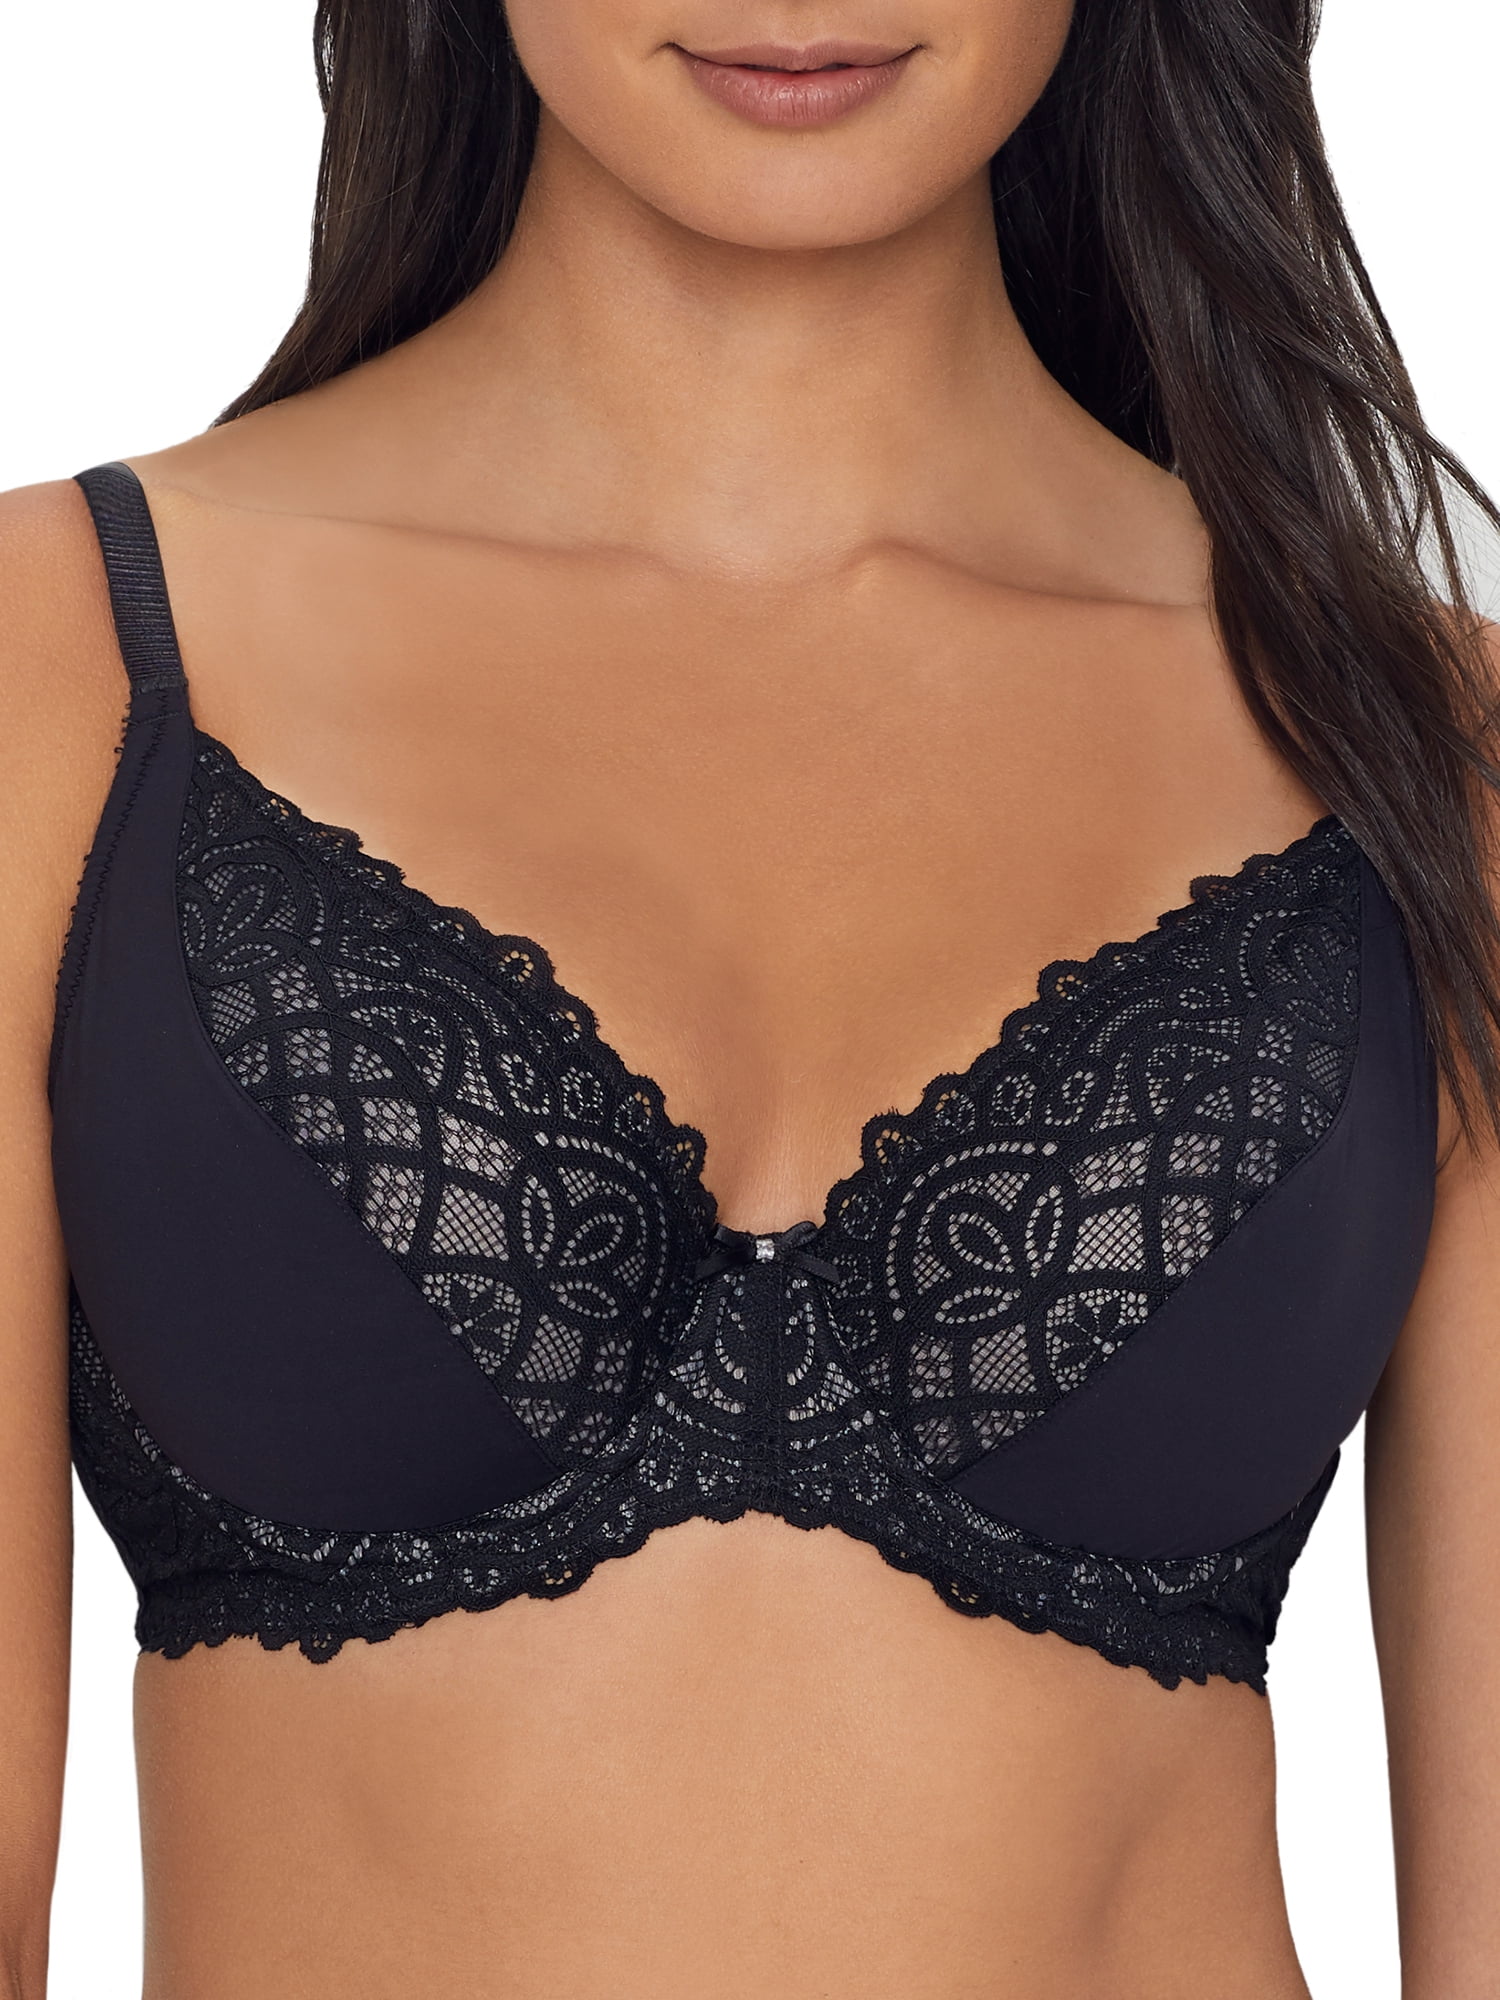 NEW CHARNOS ROSALIND BLACK FULL CUP UNDERWIRED BRA 116501 UK 32E OR 40D